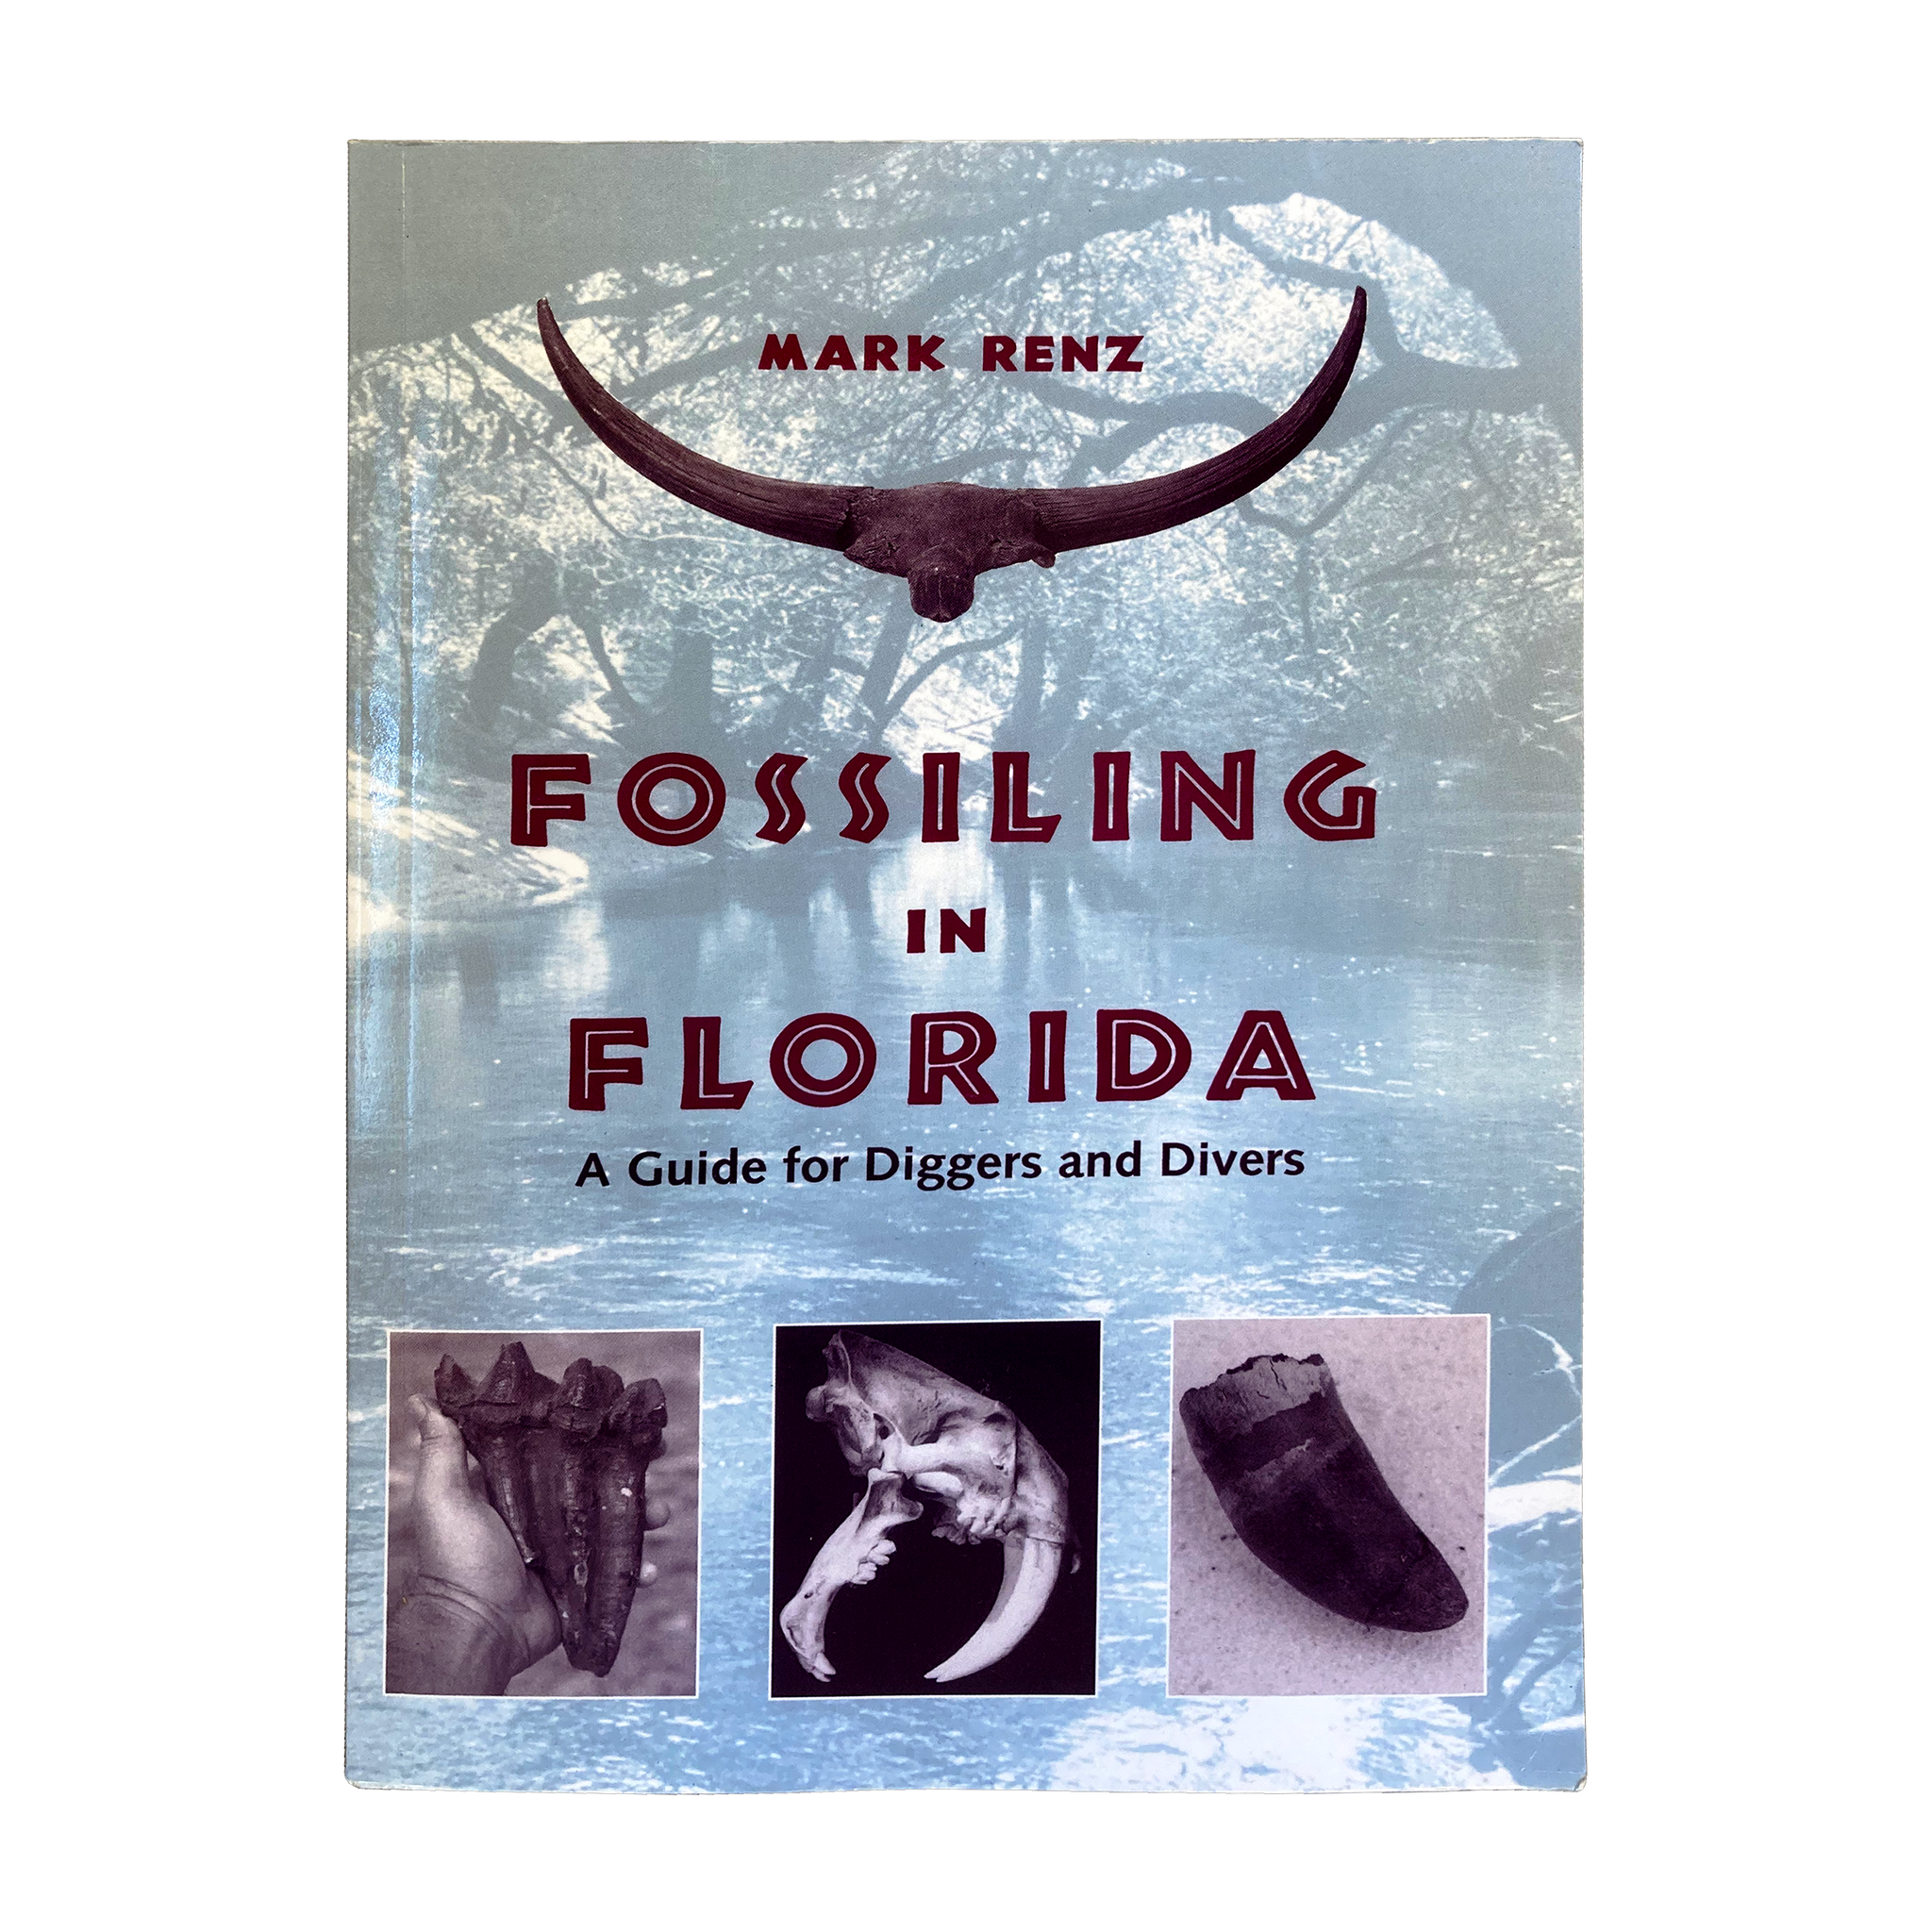 Fossiling in Florida - A Guide for Diggers and Divers